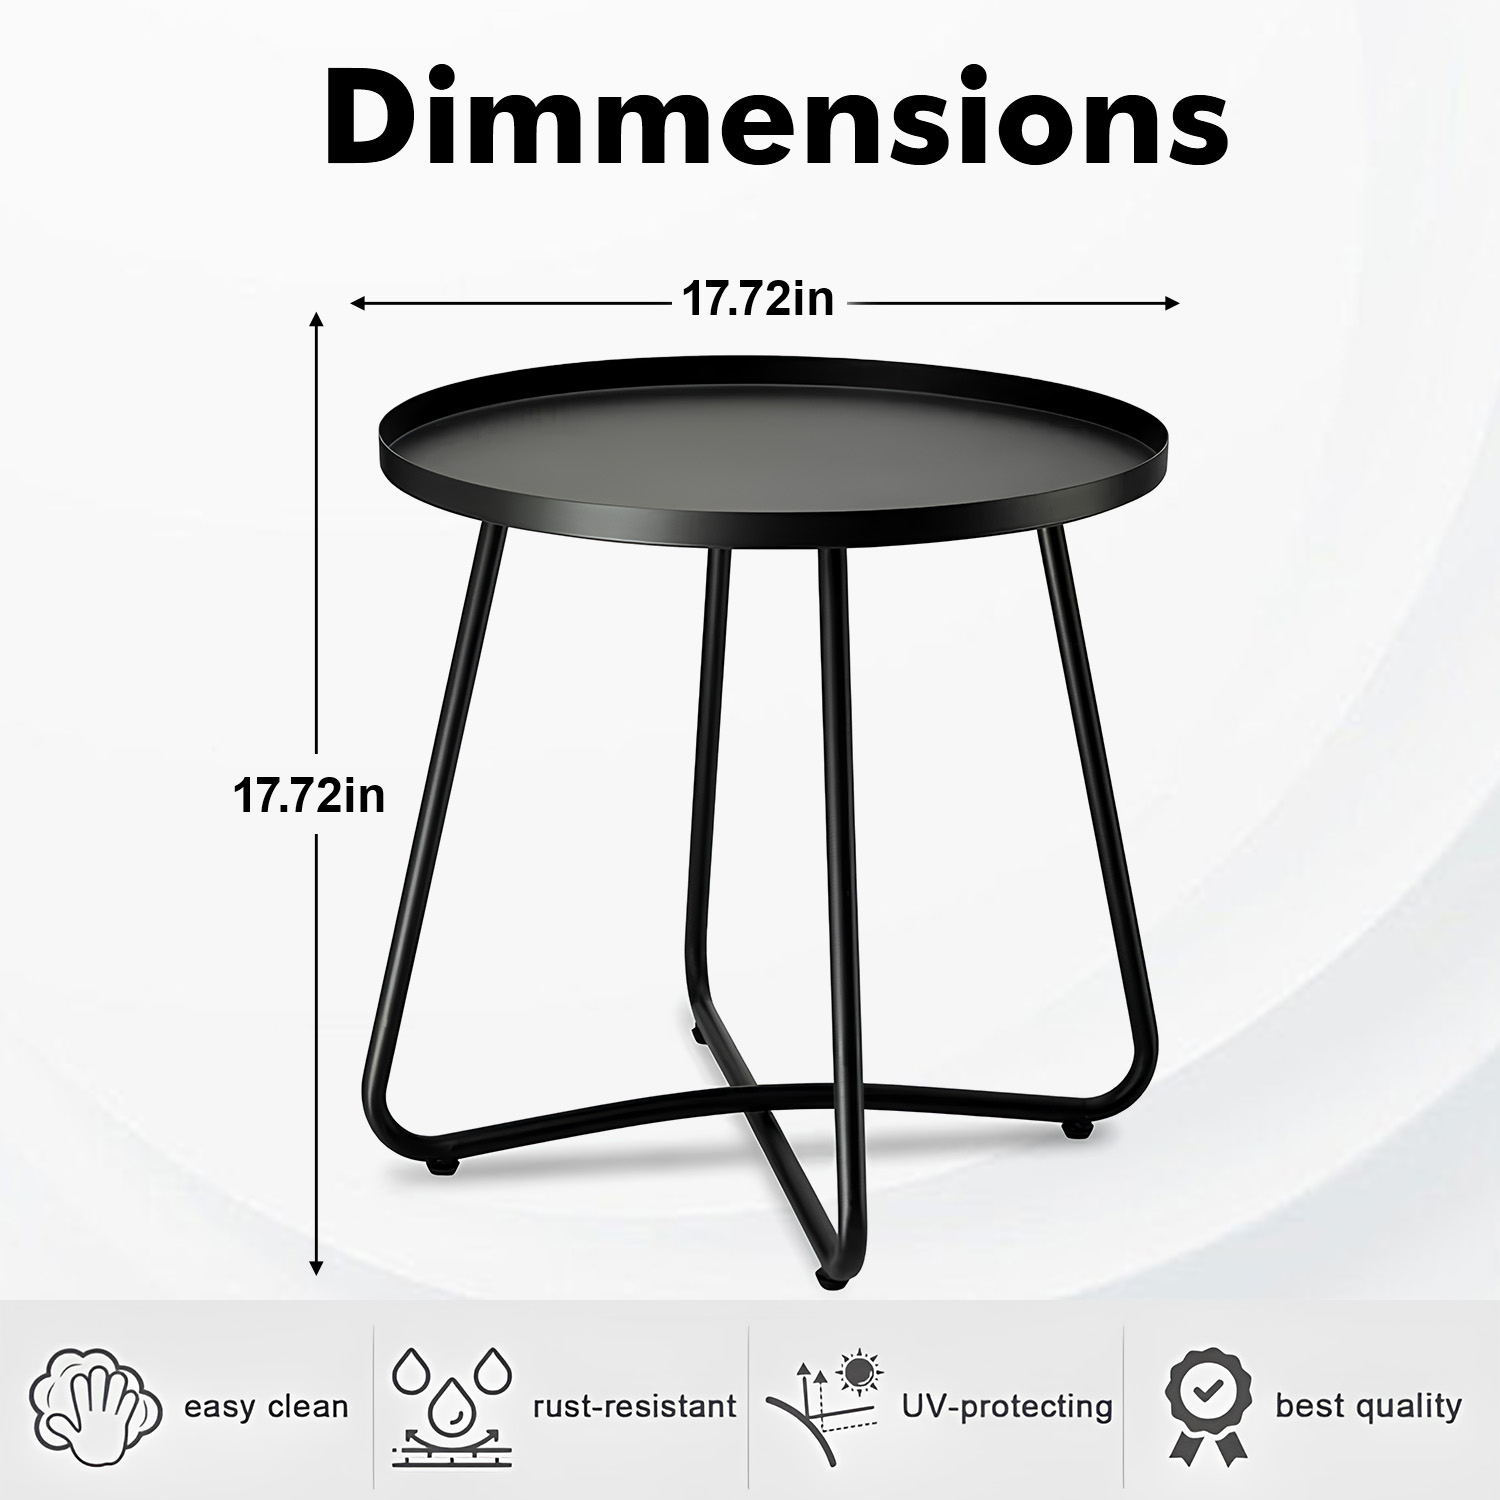 danpinera Outdoor Side Table, Small Round End Table with Weather Resistant Steel for Patio,Yard,Balcony,Garden - Black - image 2 of 9